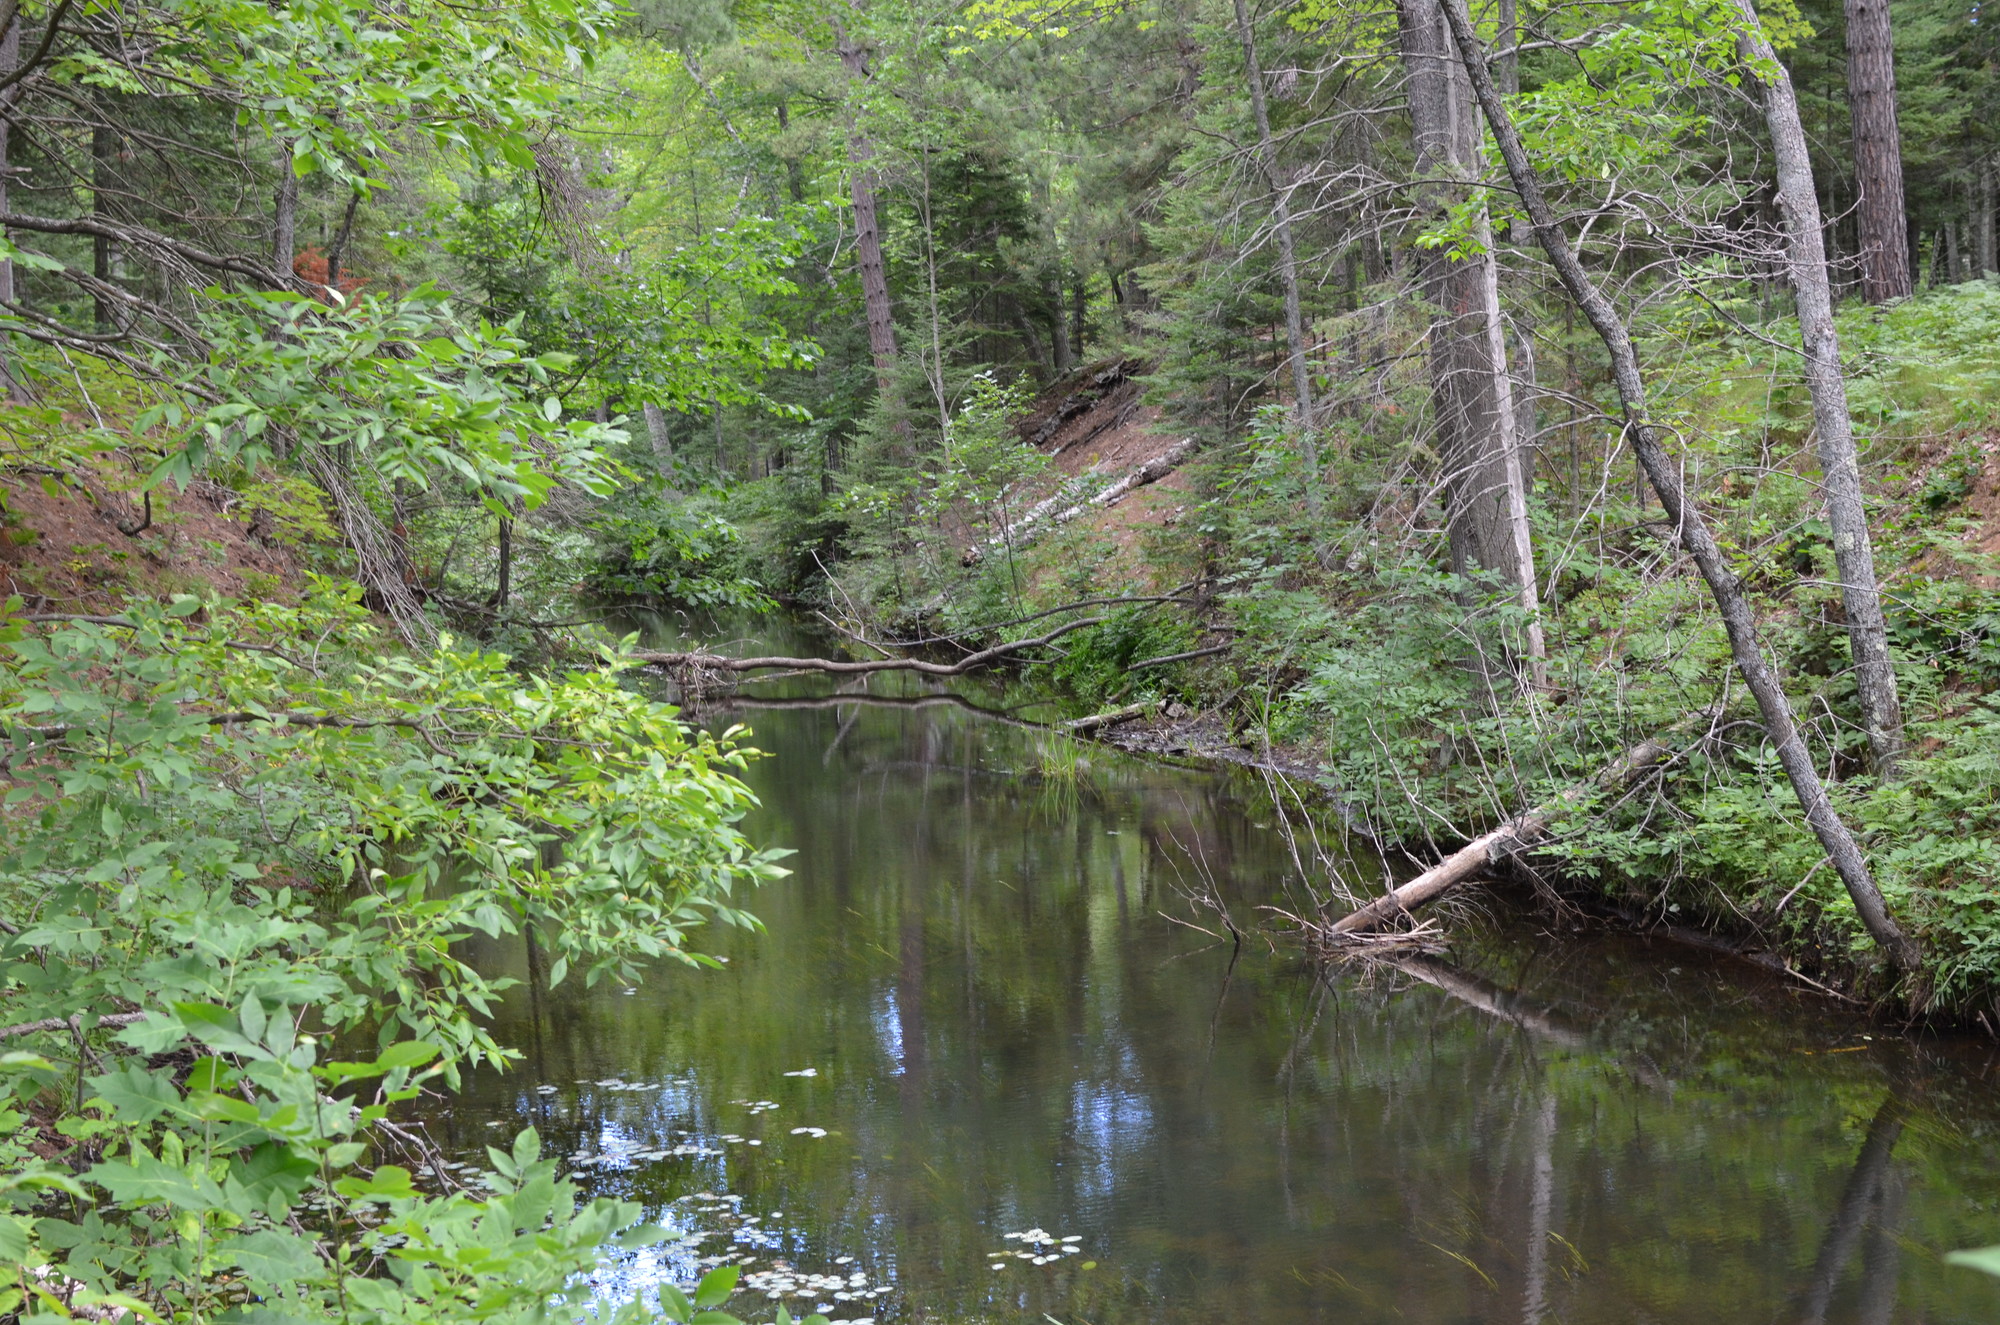 Harlow Creek is a popular feature within the Little Presque Isle Tract in Marquette County.